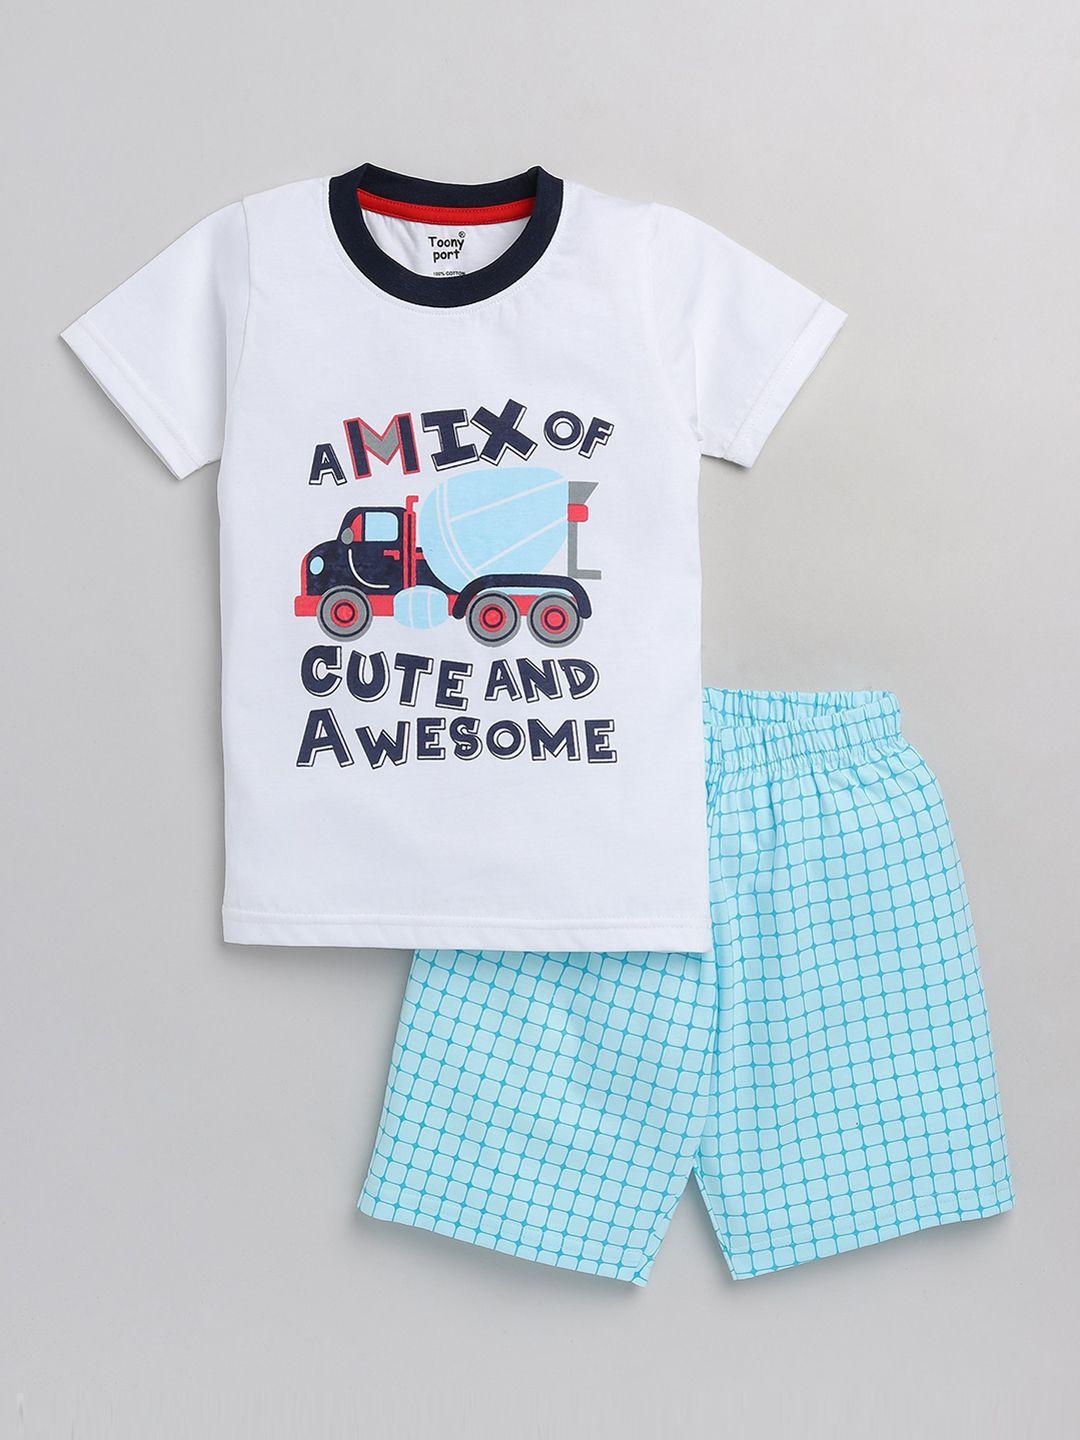 toonyport boys white & blue printed t-shirt with shorts